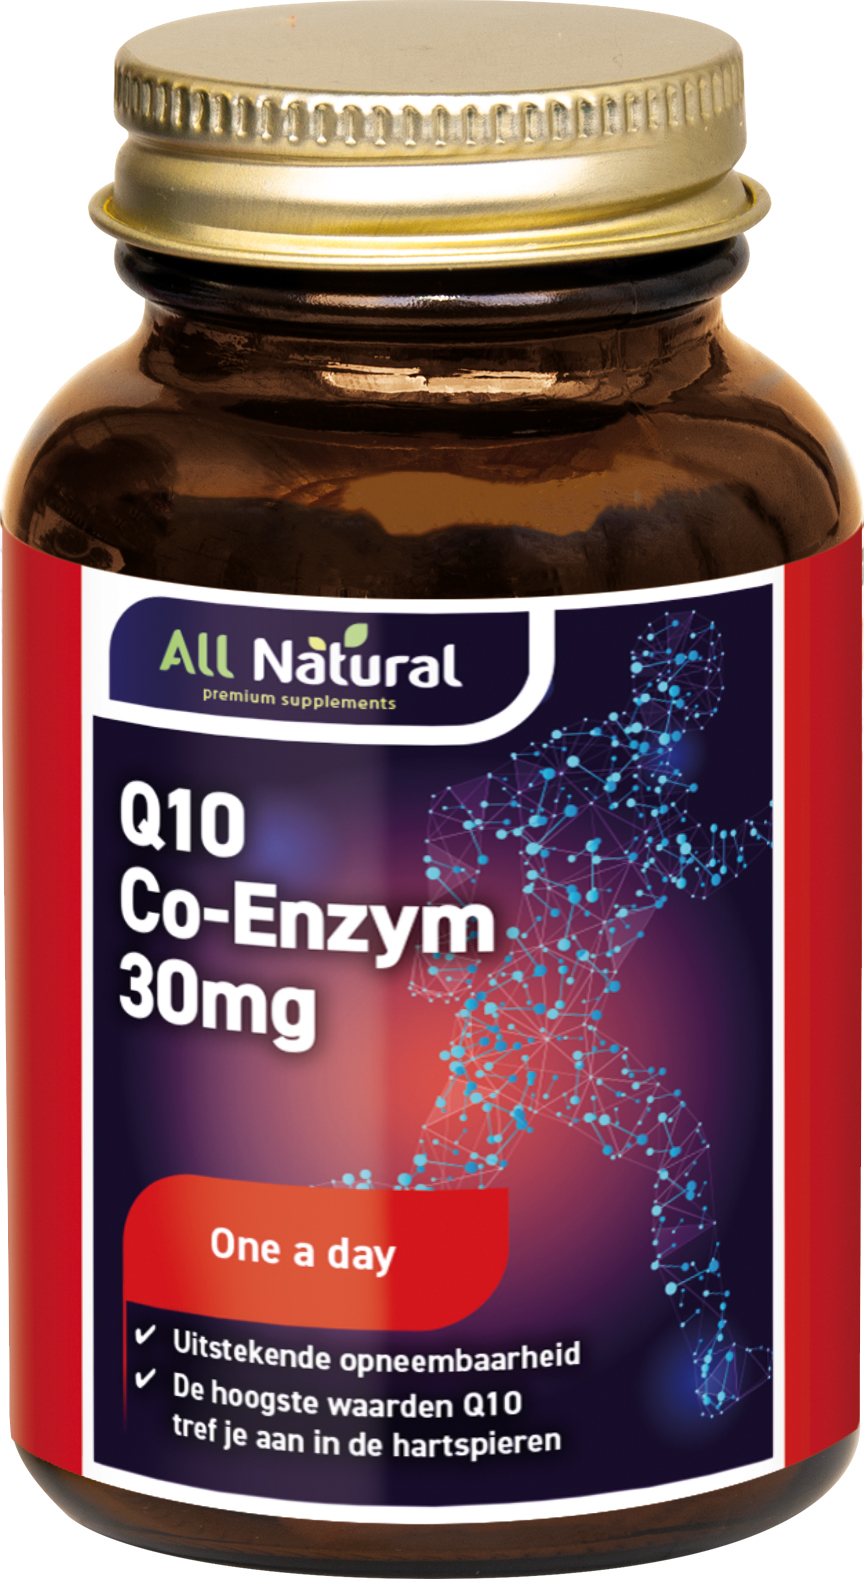 All Natural Q10 Co-Enzym 30mg Capsules